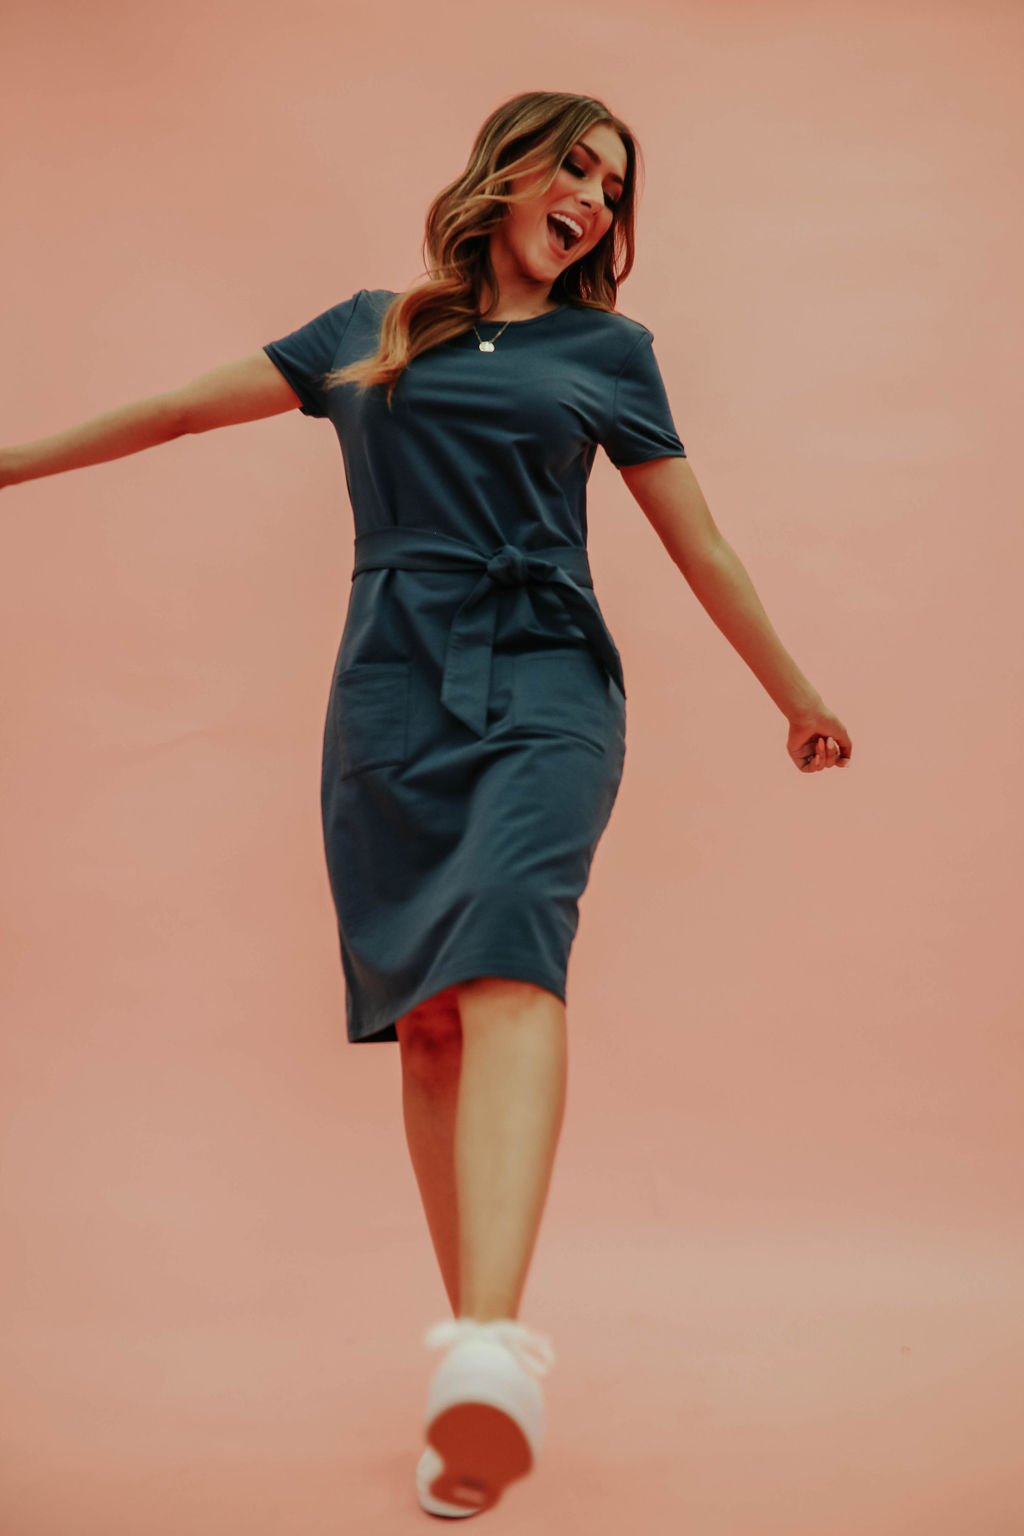 THE SUMMER PLAY DRESS BY PINK DESERT IN NAVY